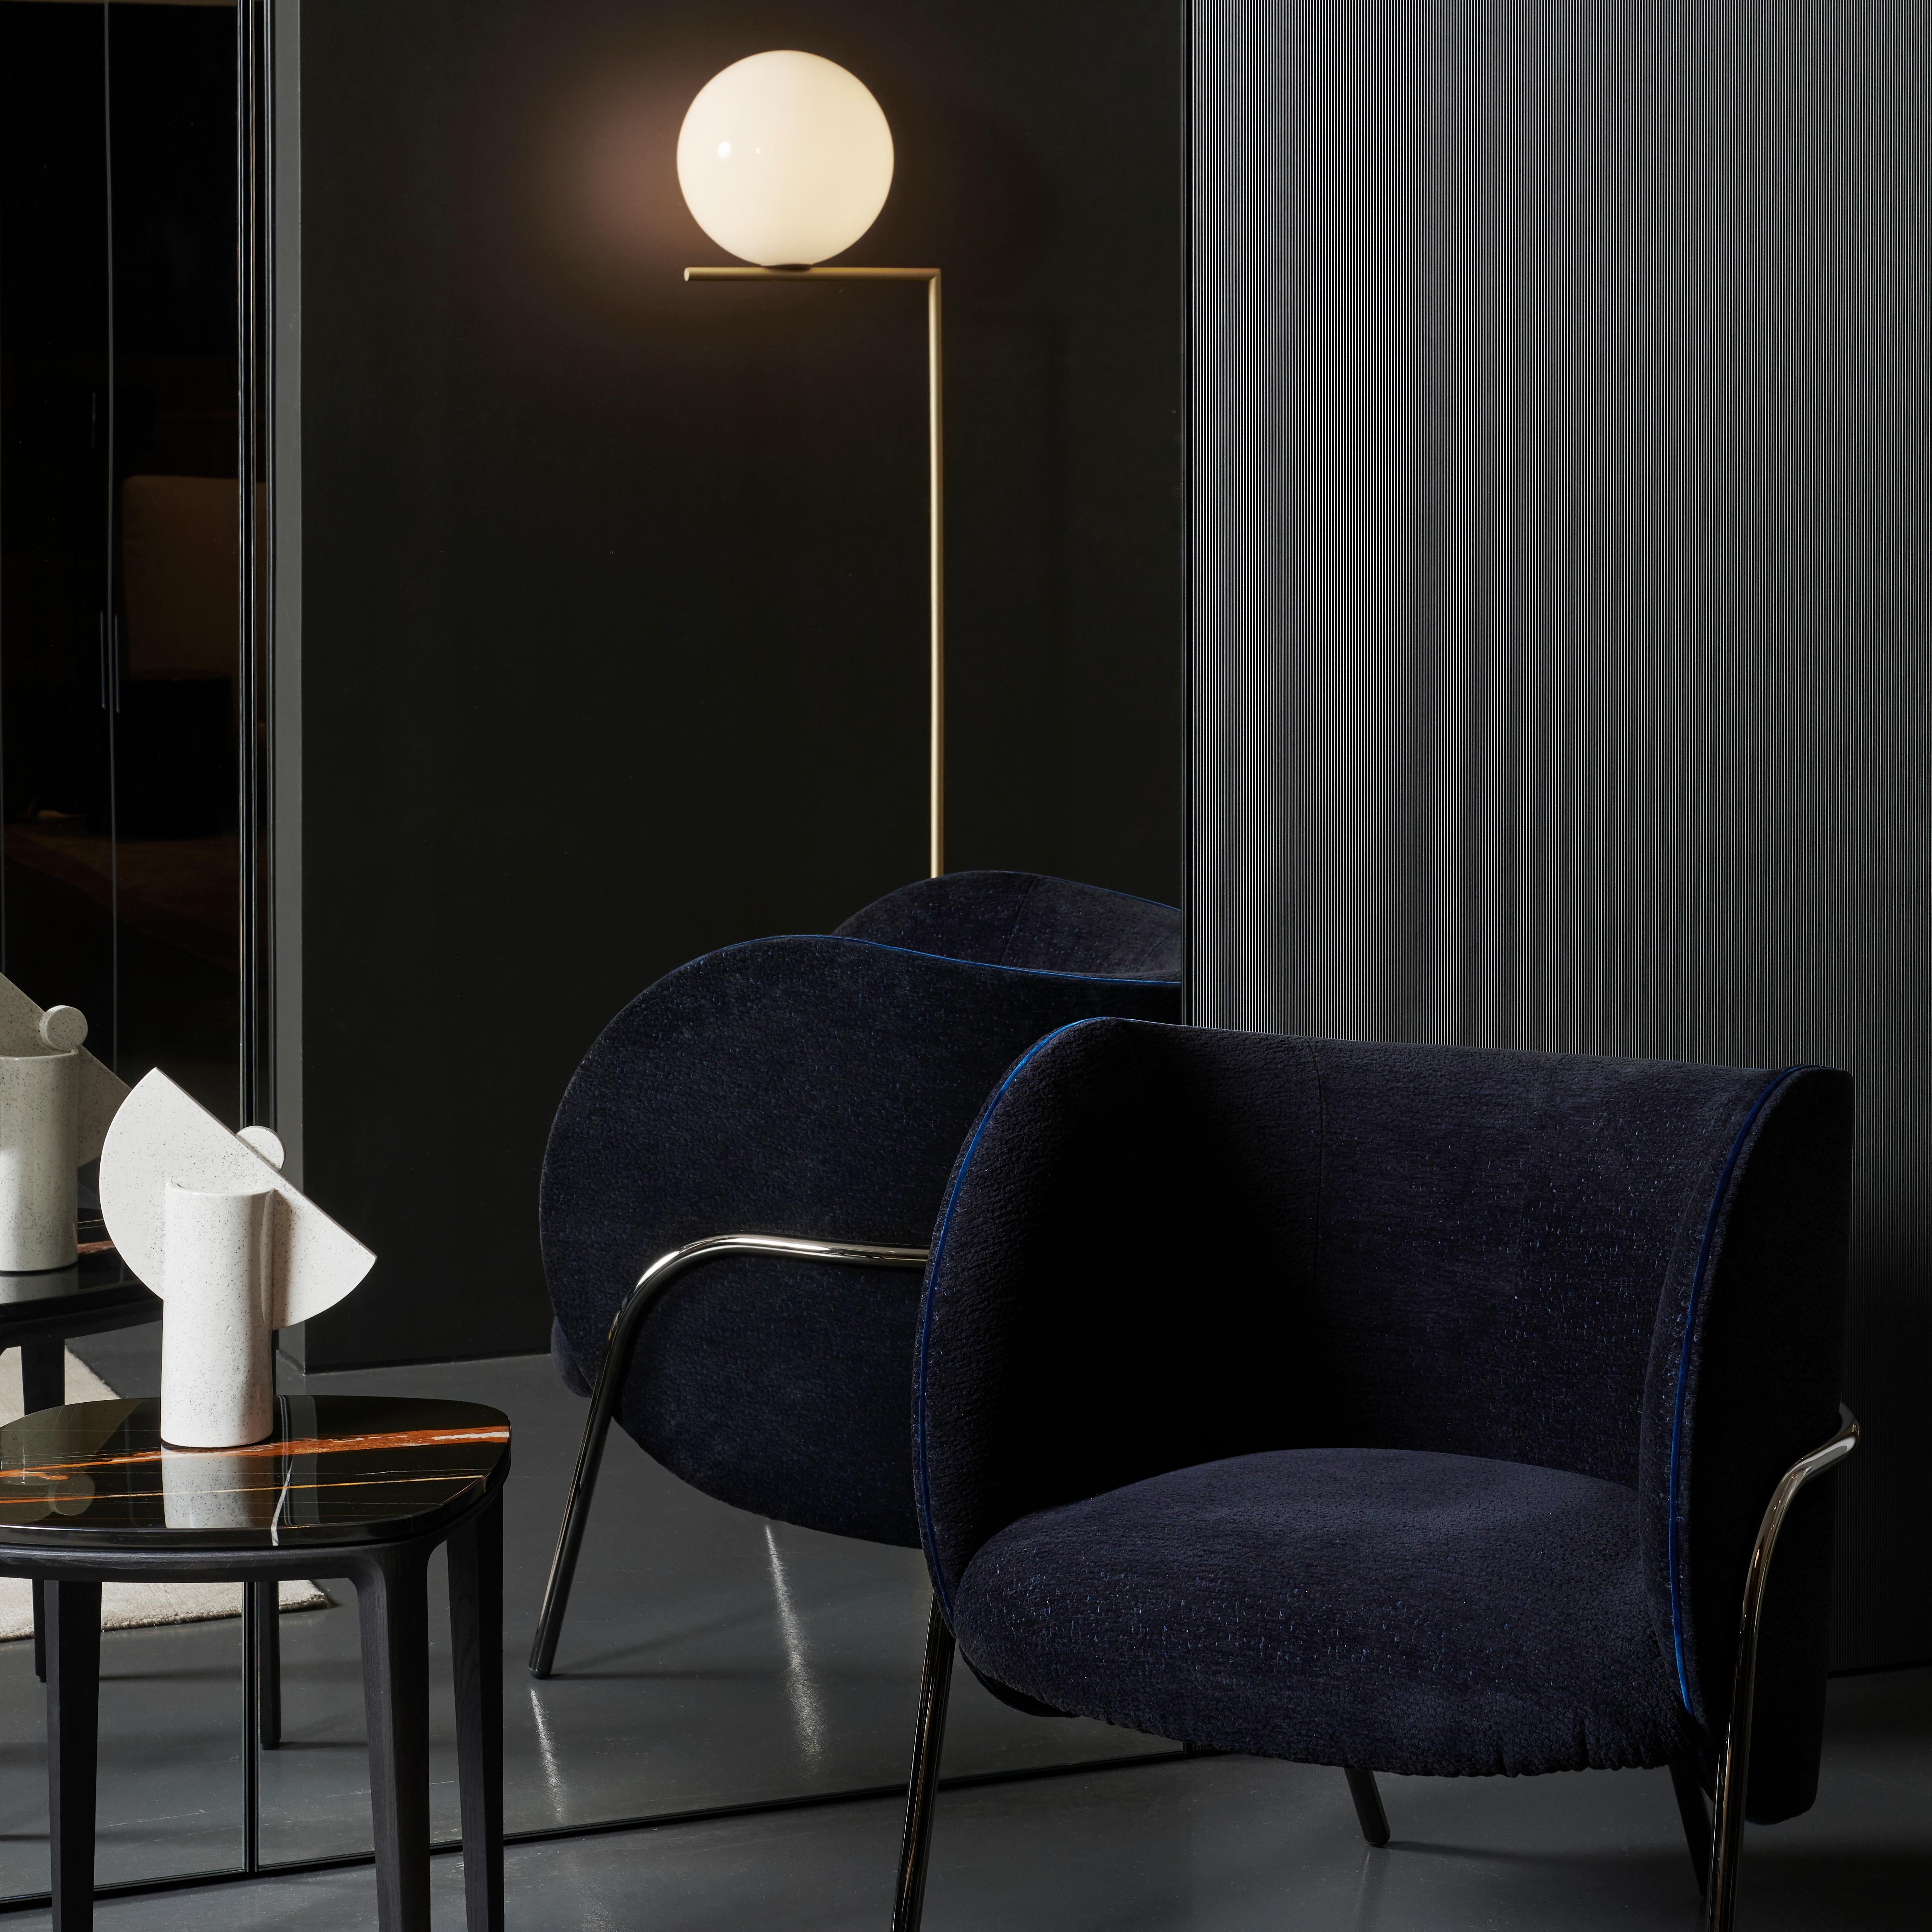 A sculptural and compact armchair available in two variants, with or without headrest. Royce joins SP01’s elegant collection of character driven designs. The original avian inspiration behind the design animates the new piece, giving it a distinct